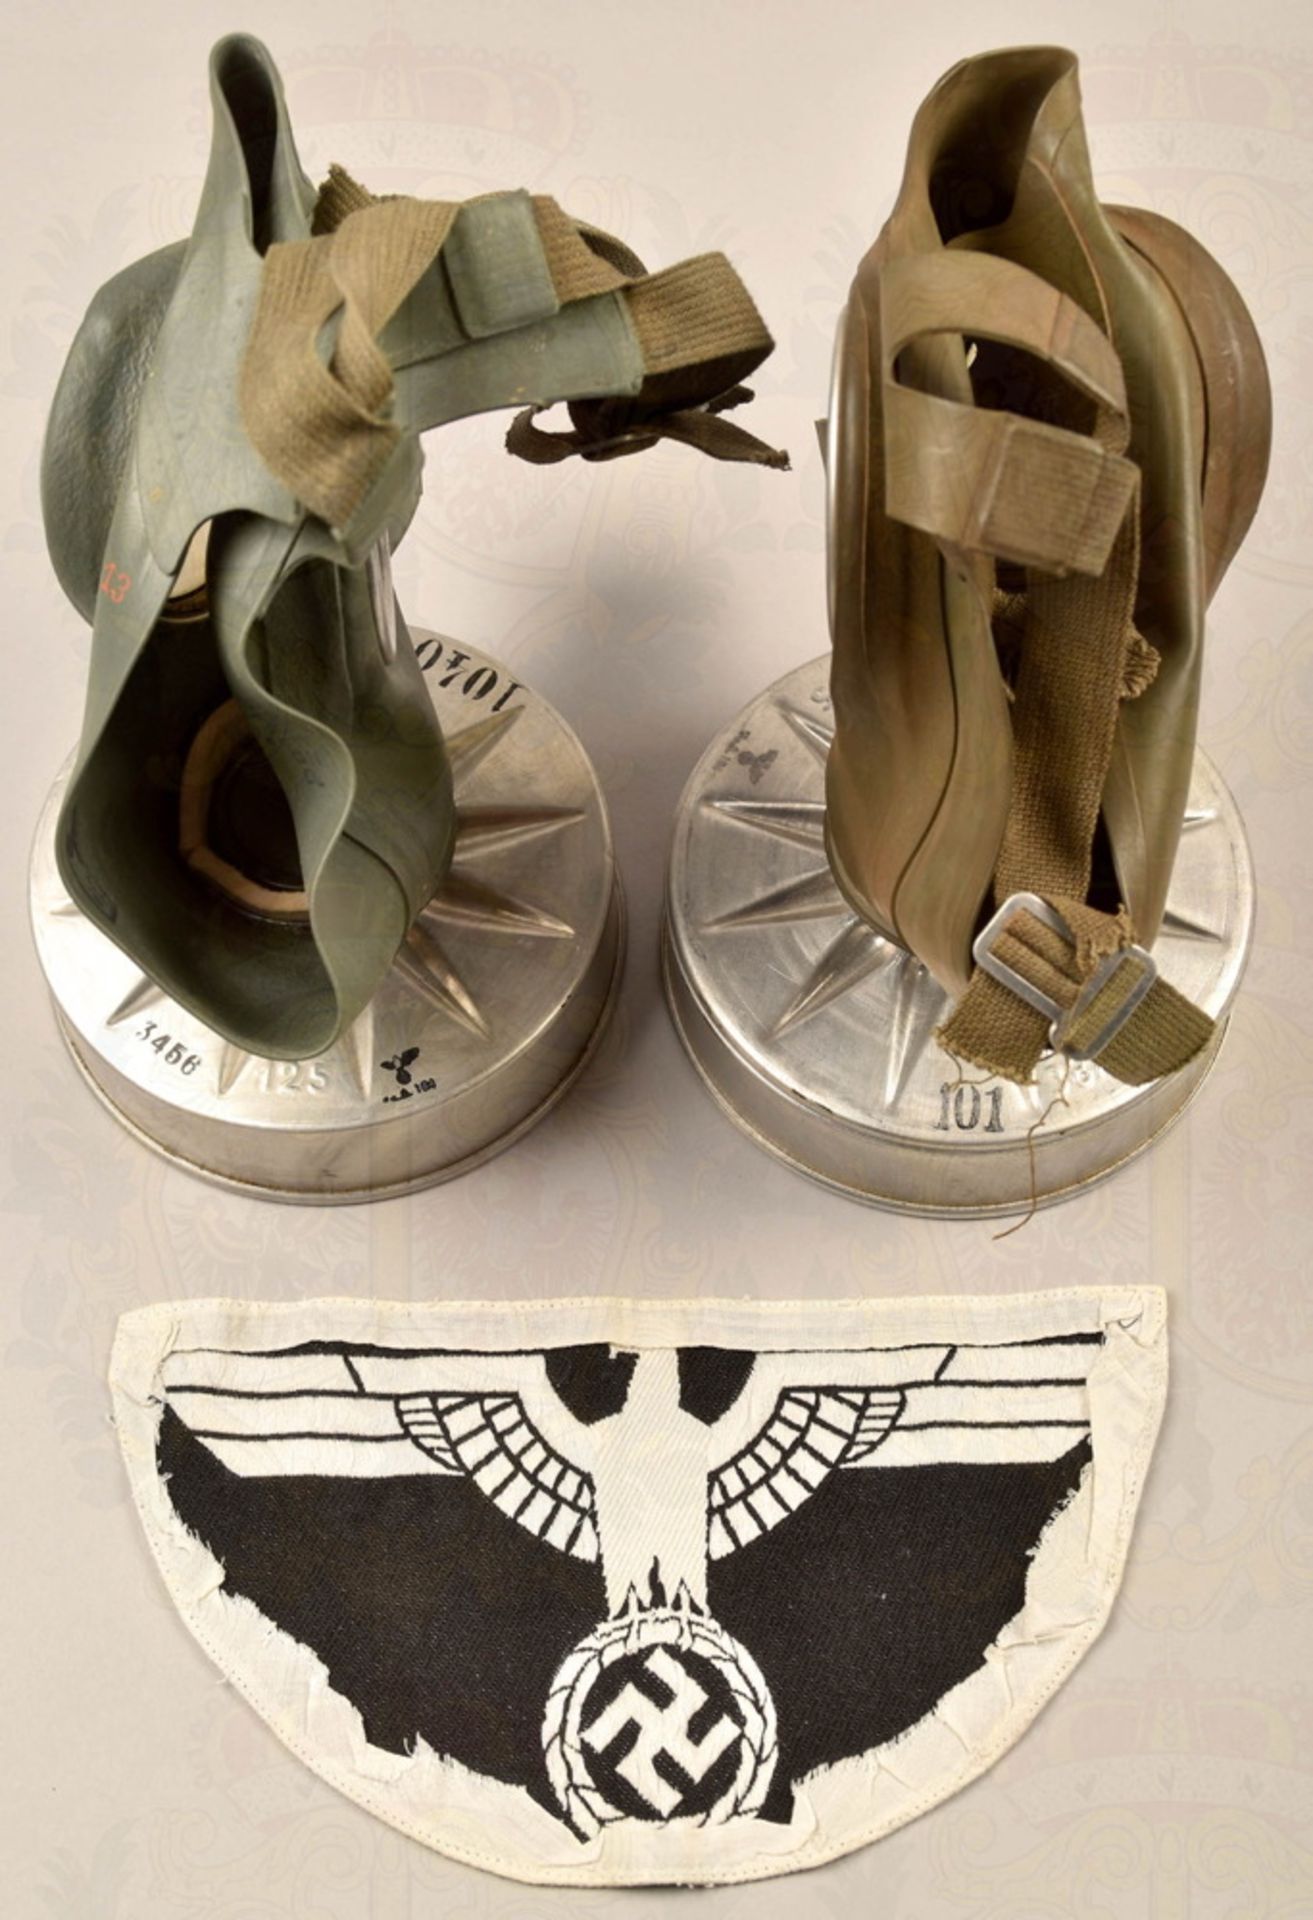 2 gas masks of 1940 and 1 Wehrmacht sports shirt eagle - Image 3 of 3